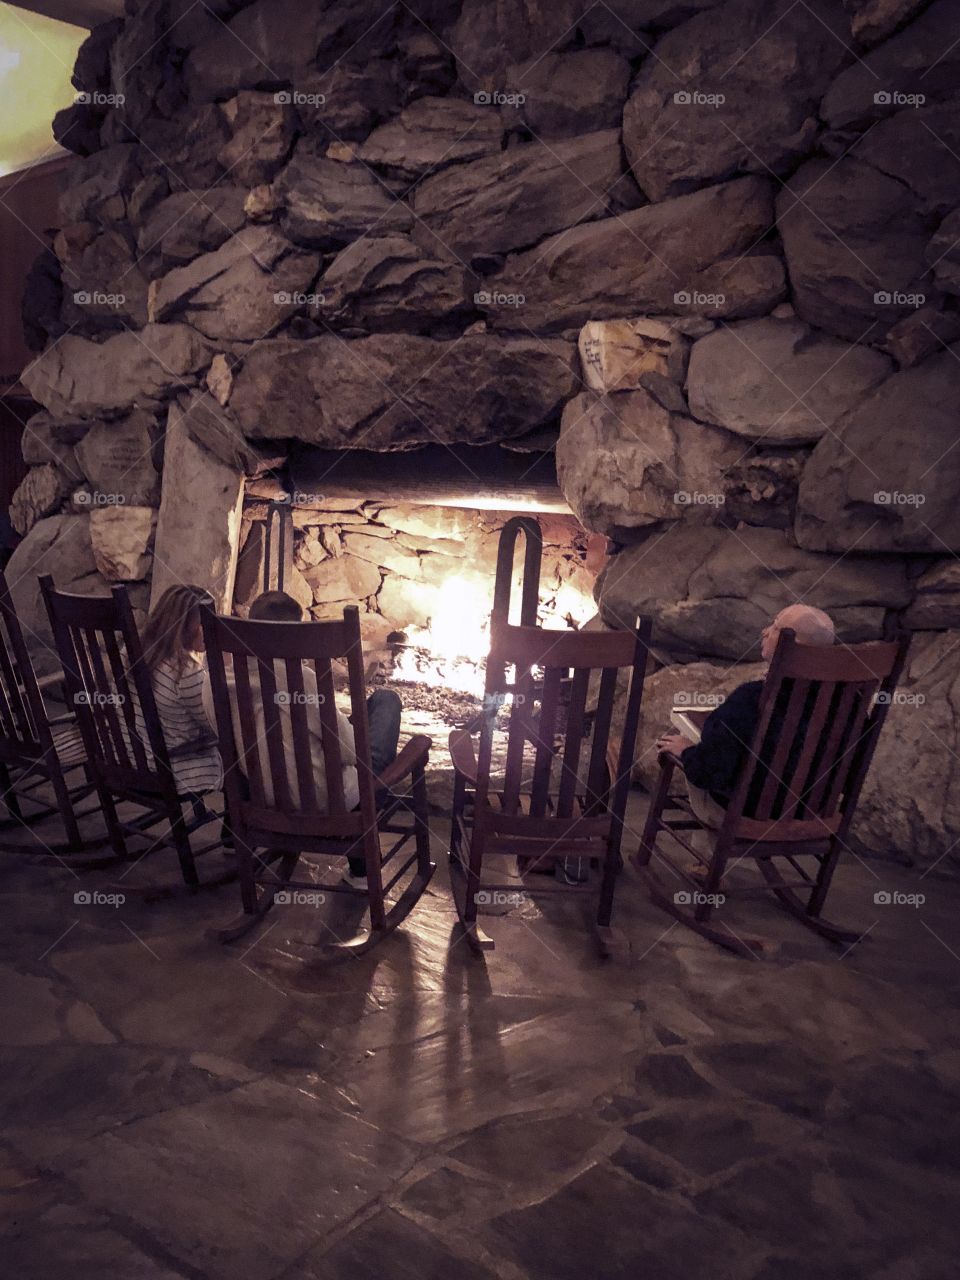 A warm evening with stories by the fireplace